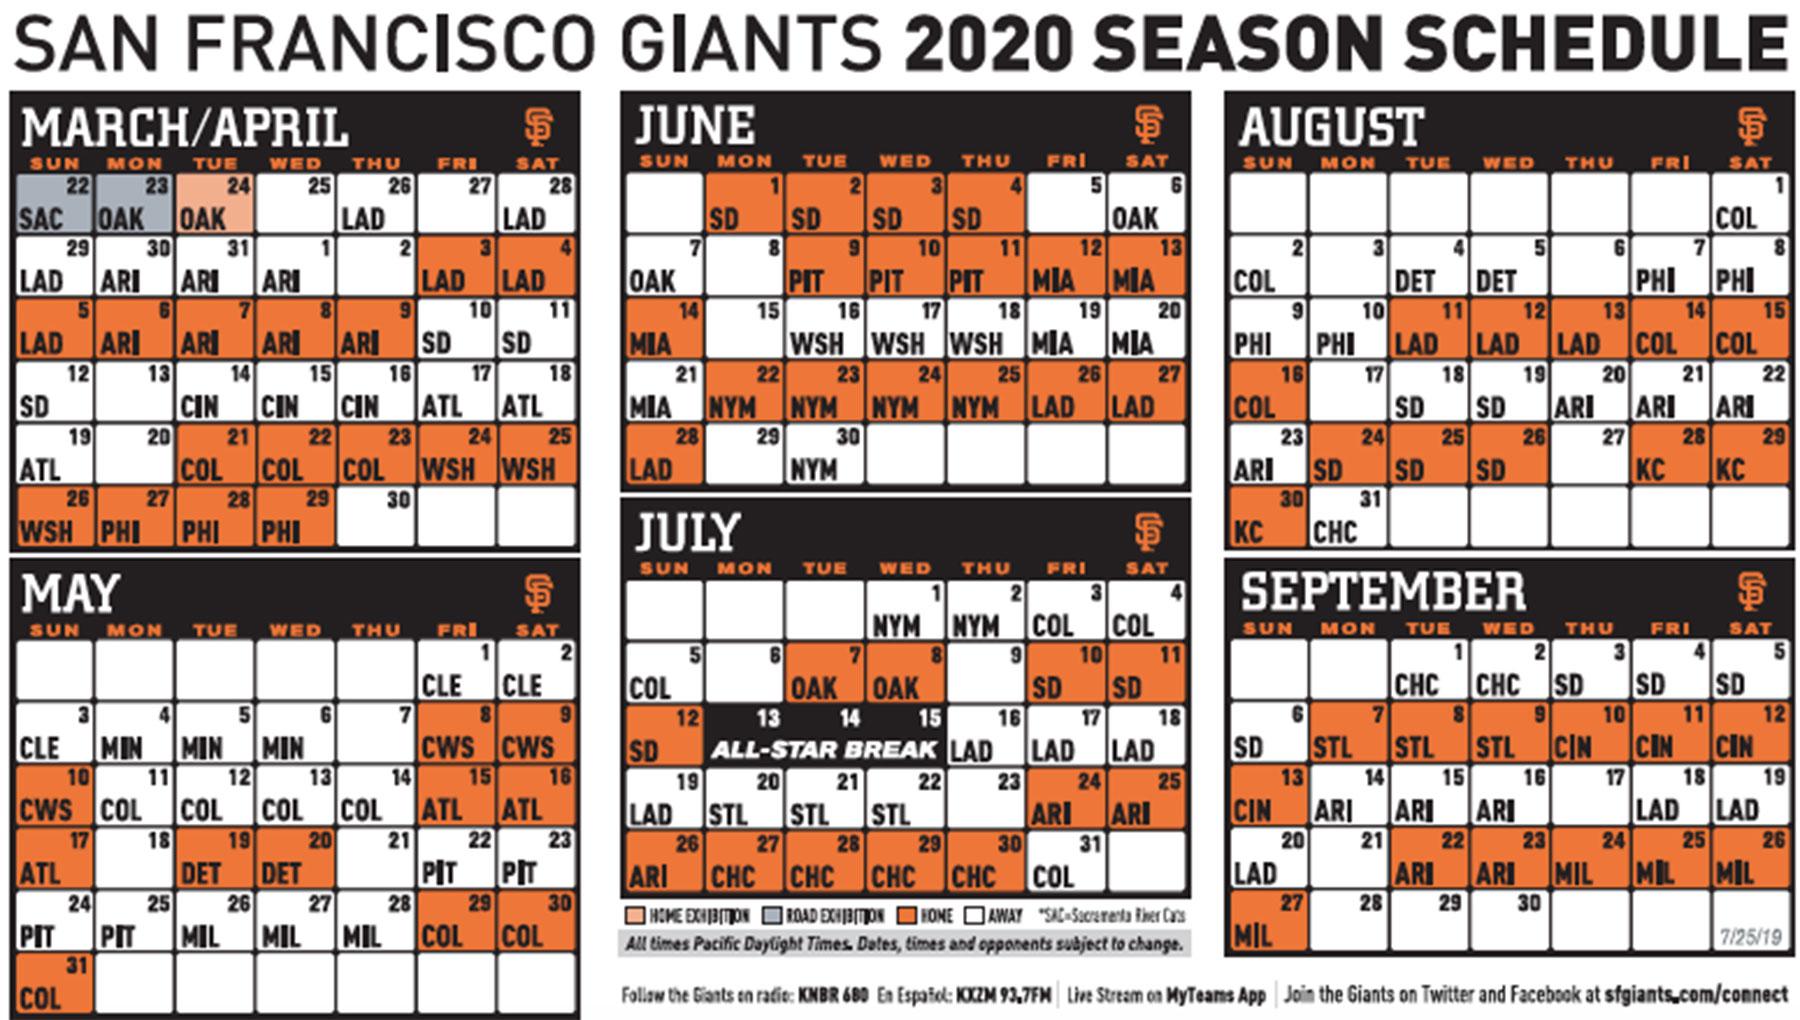 Giants release 2020 schedule, which includes two openers against the Dodgers